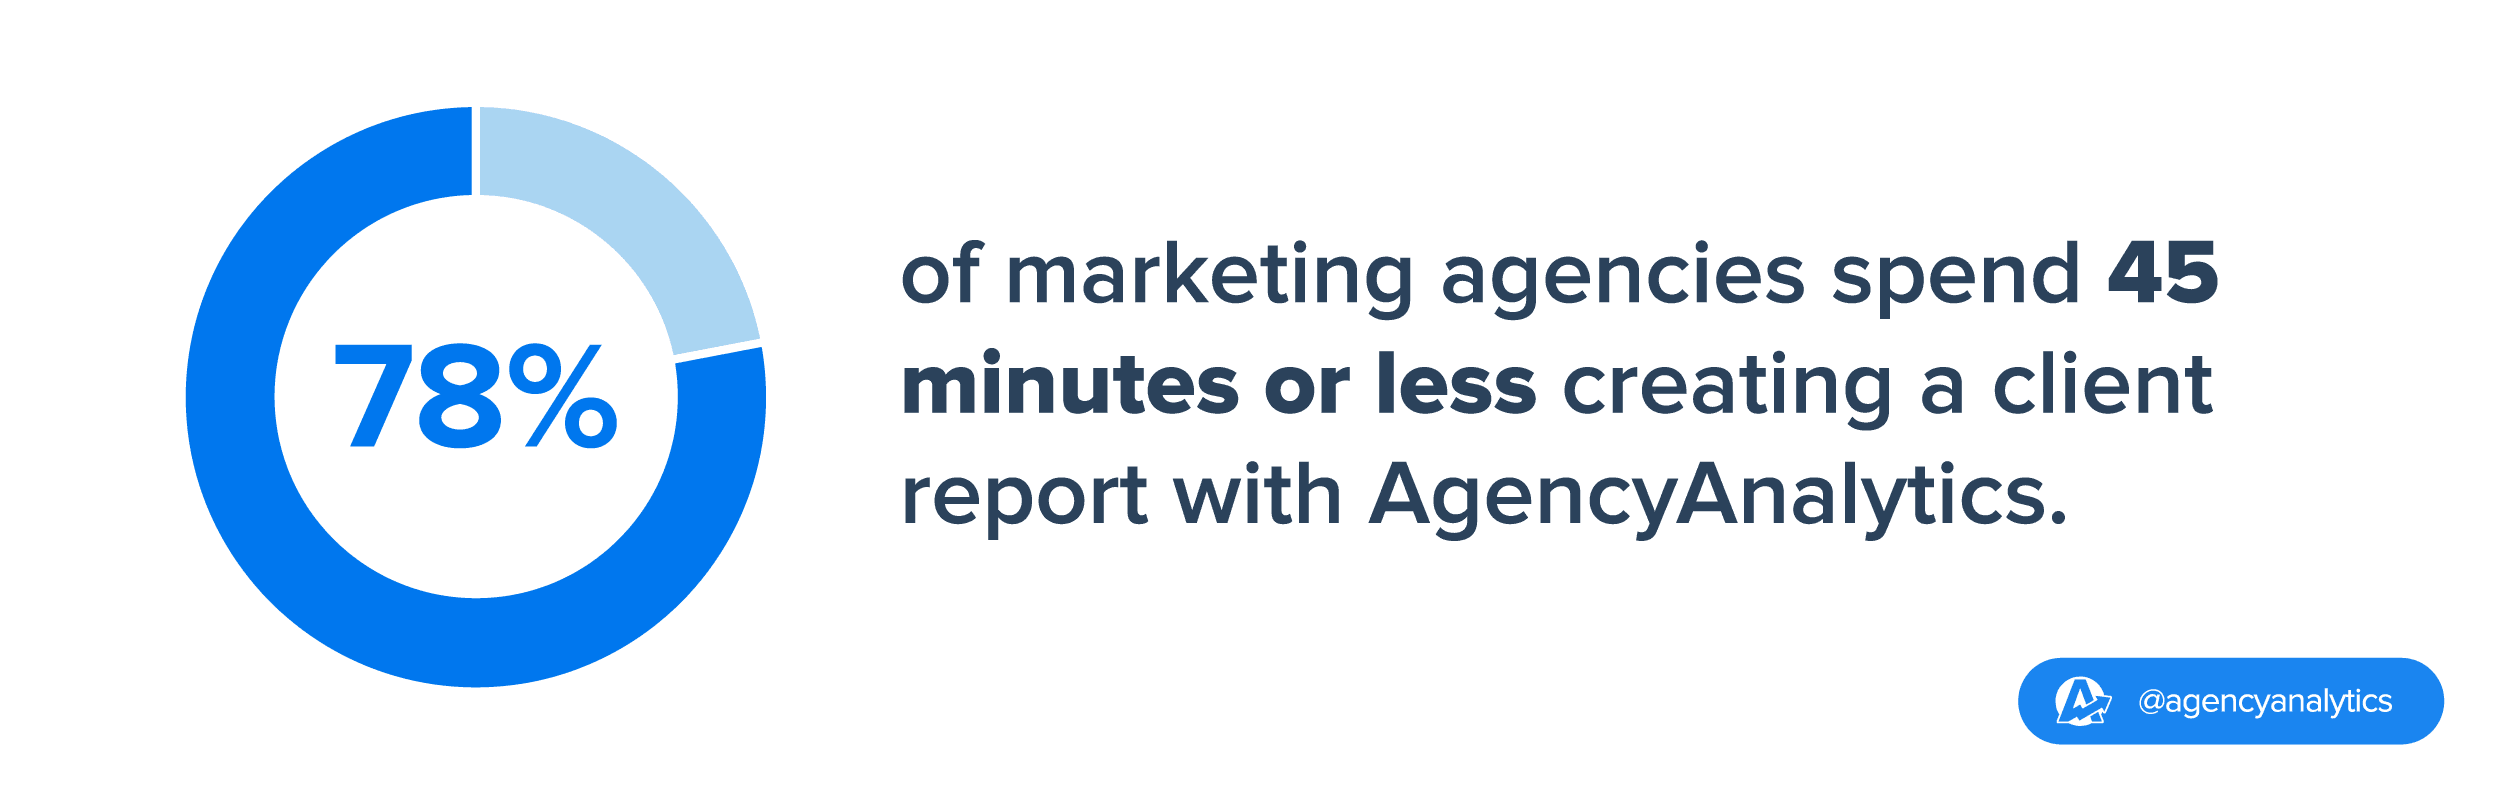 stat time spent client reporting 